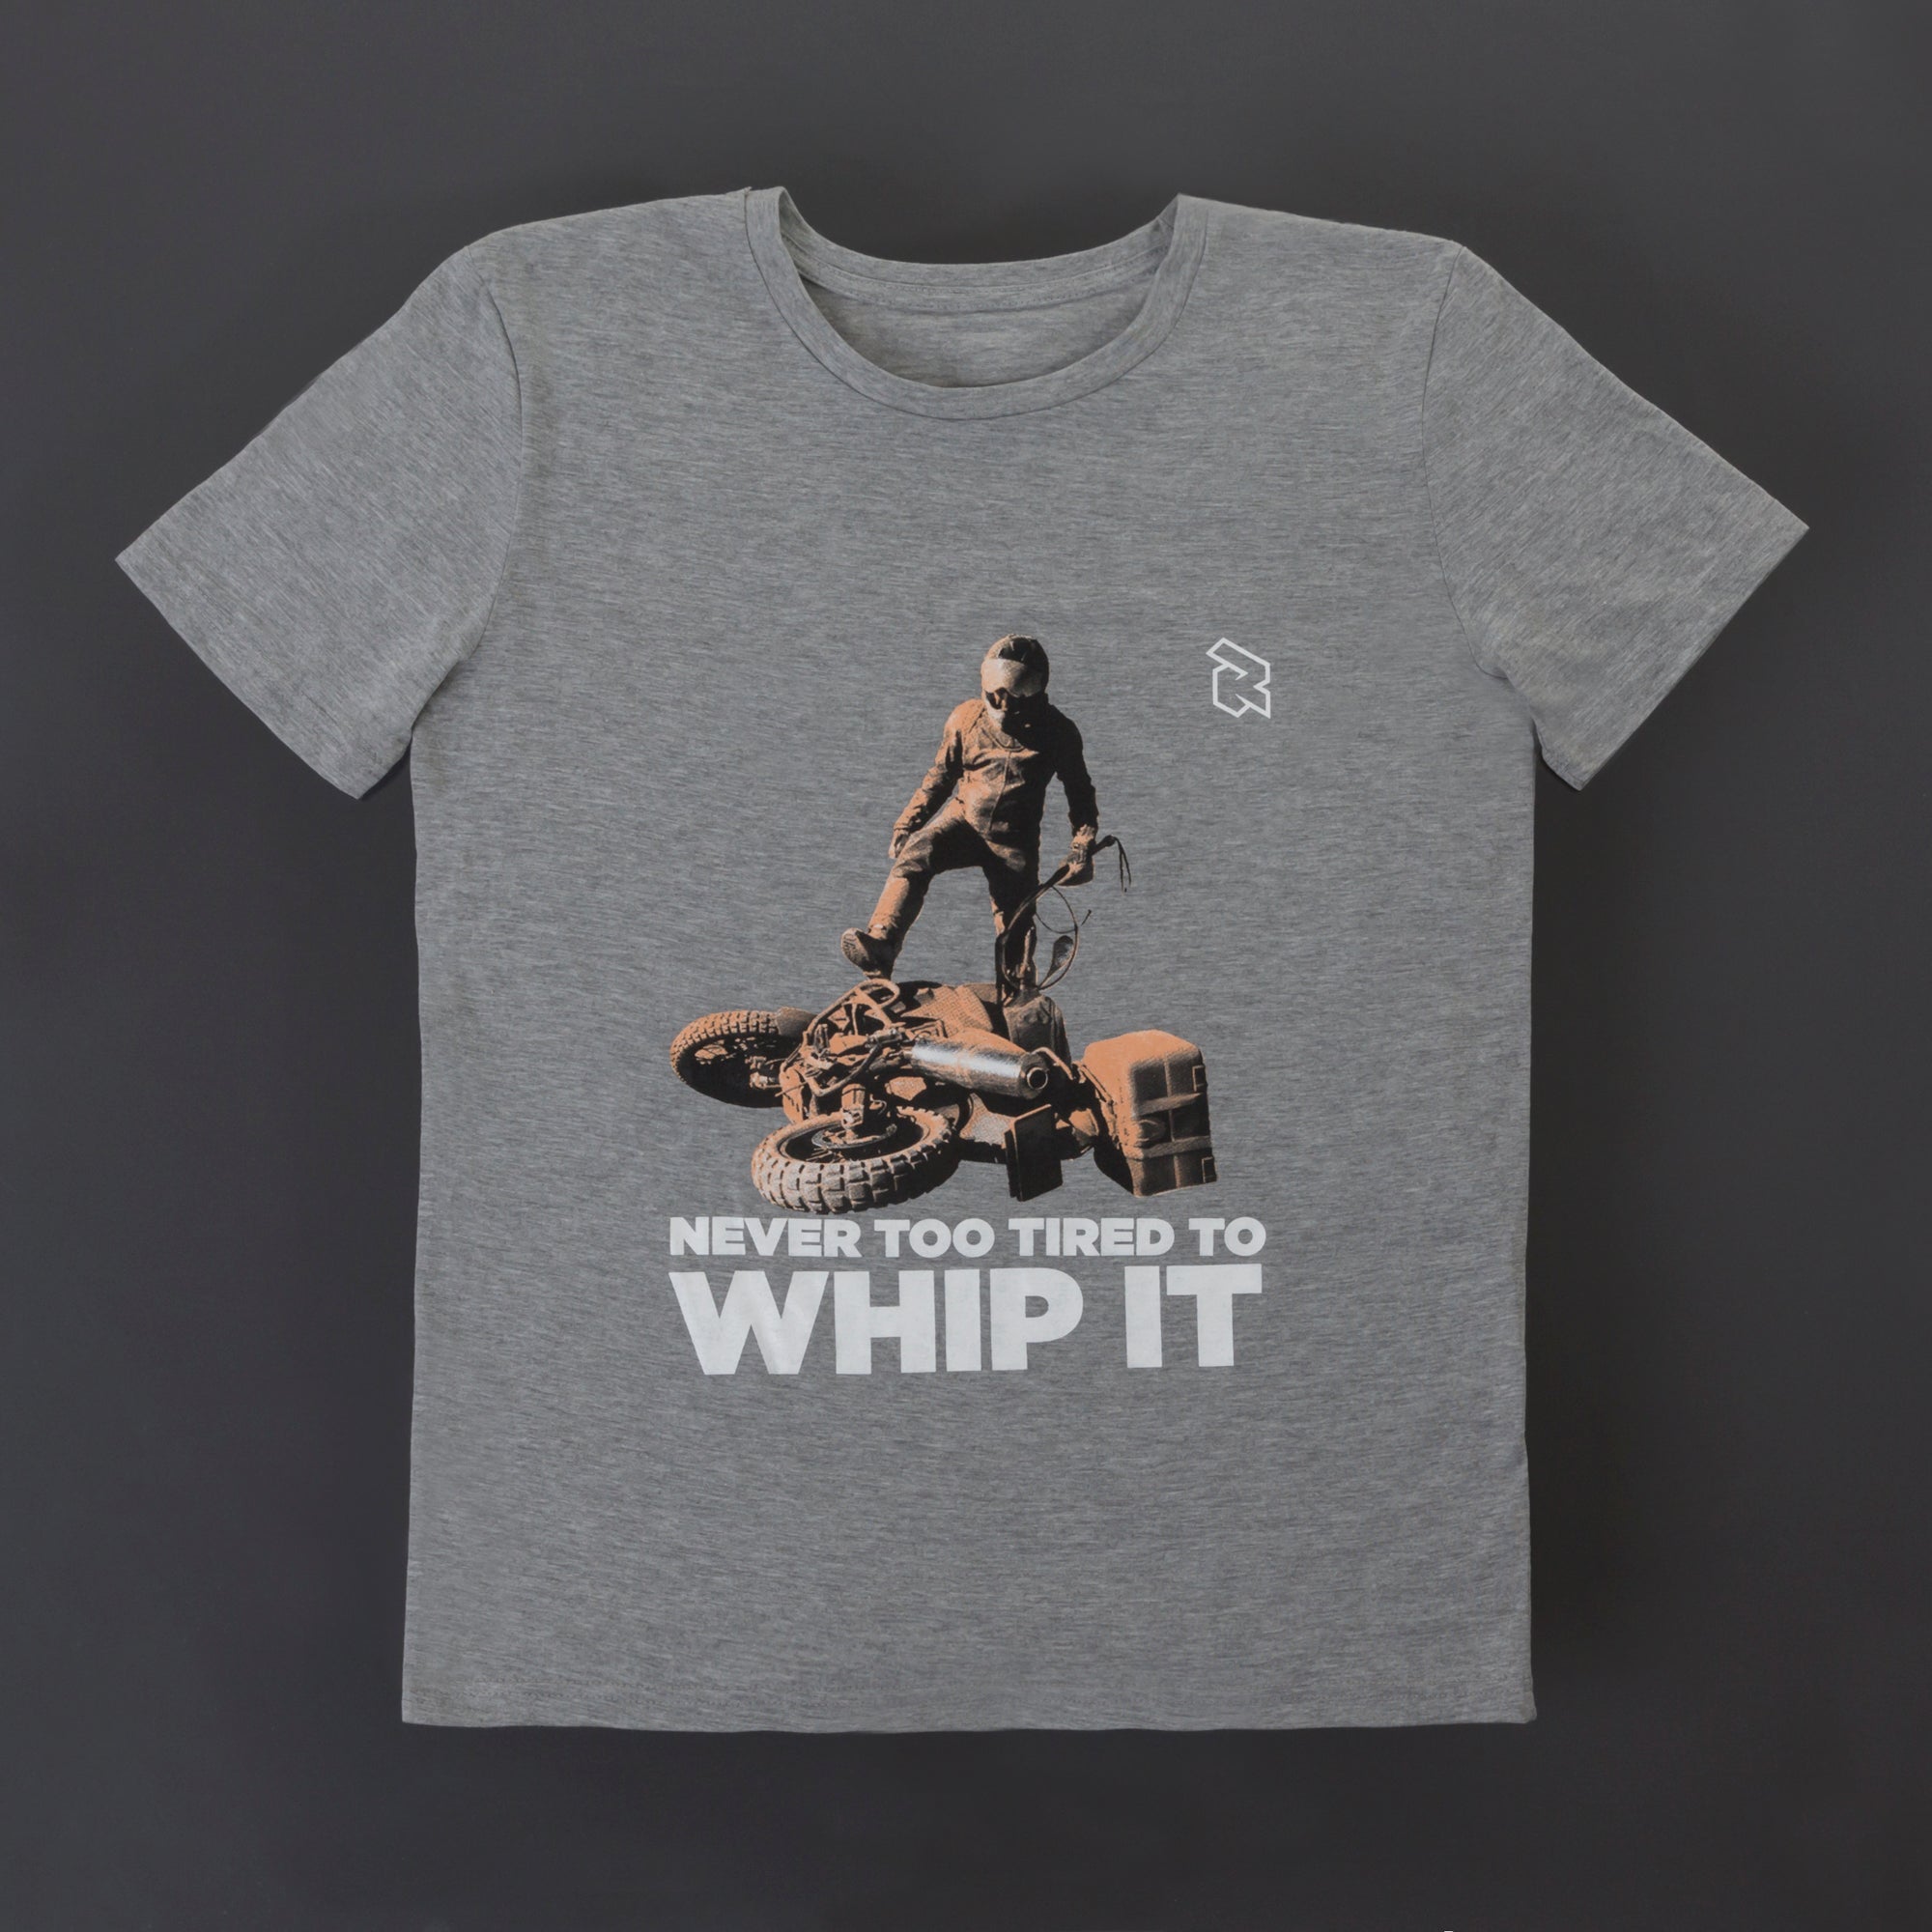 Never_too_tired_to_whip_it_-_T-shirt_front.jpg